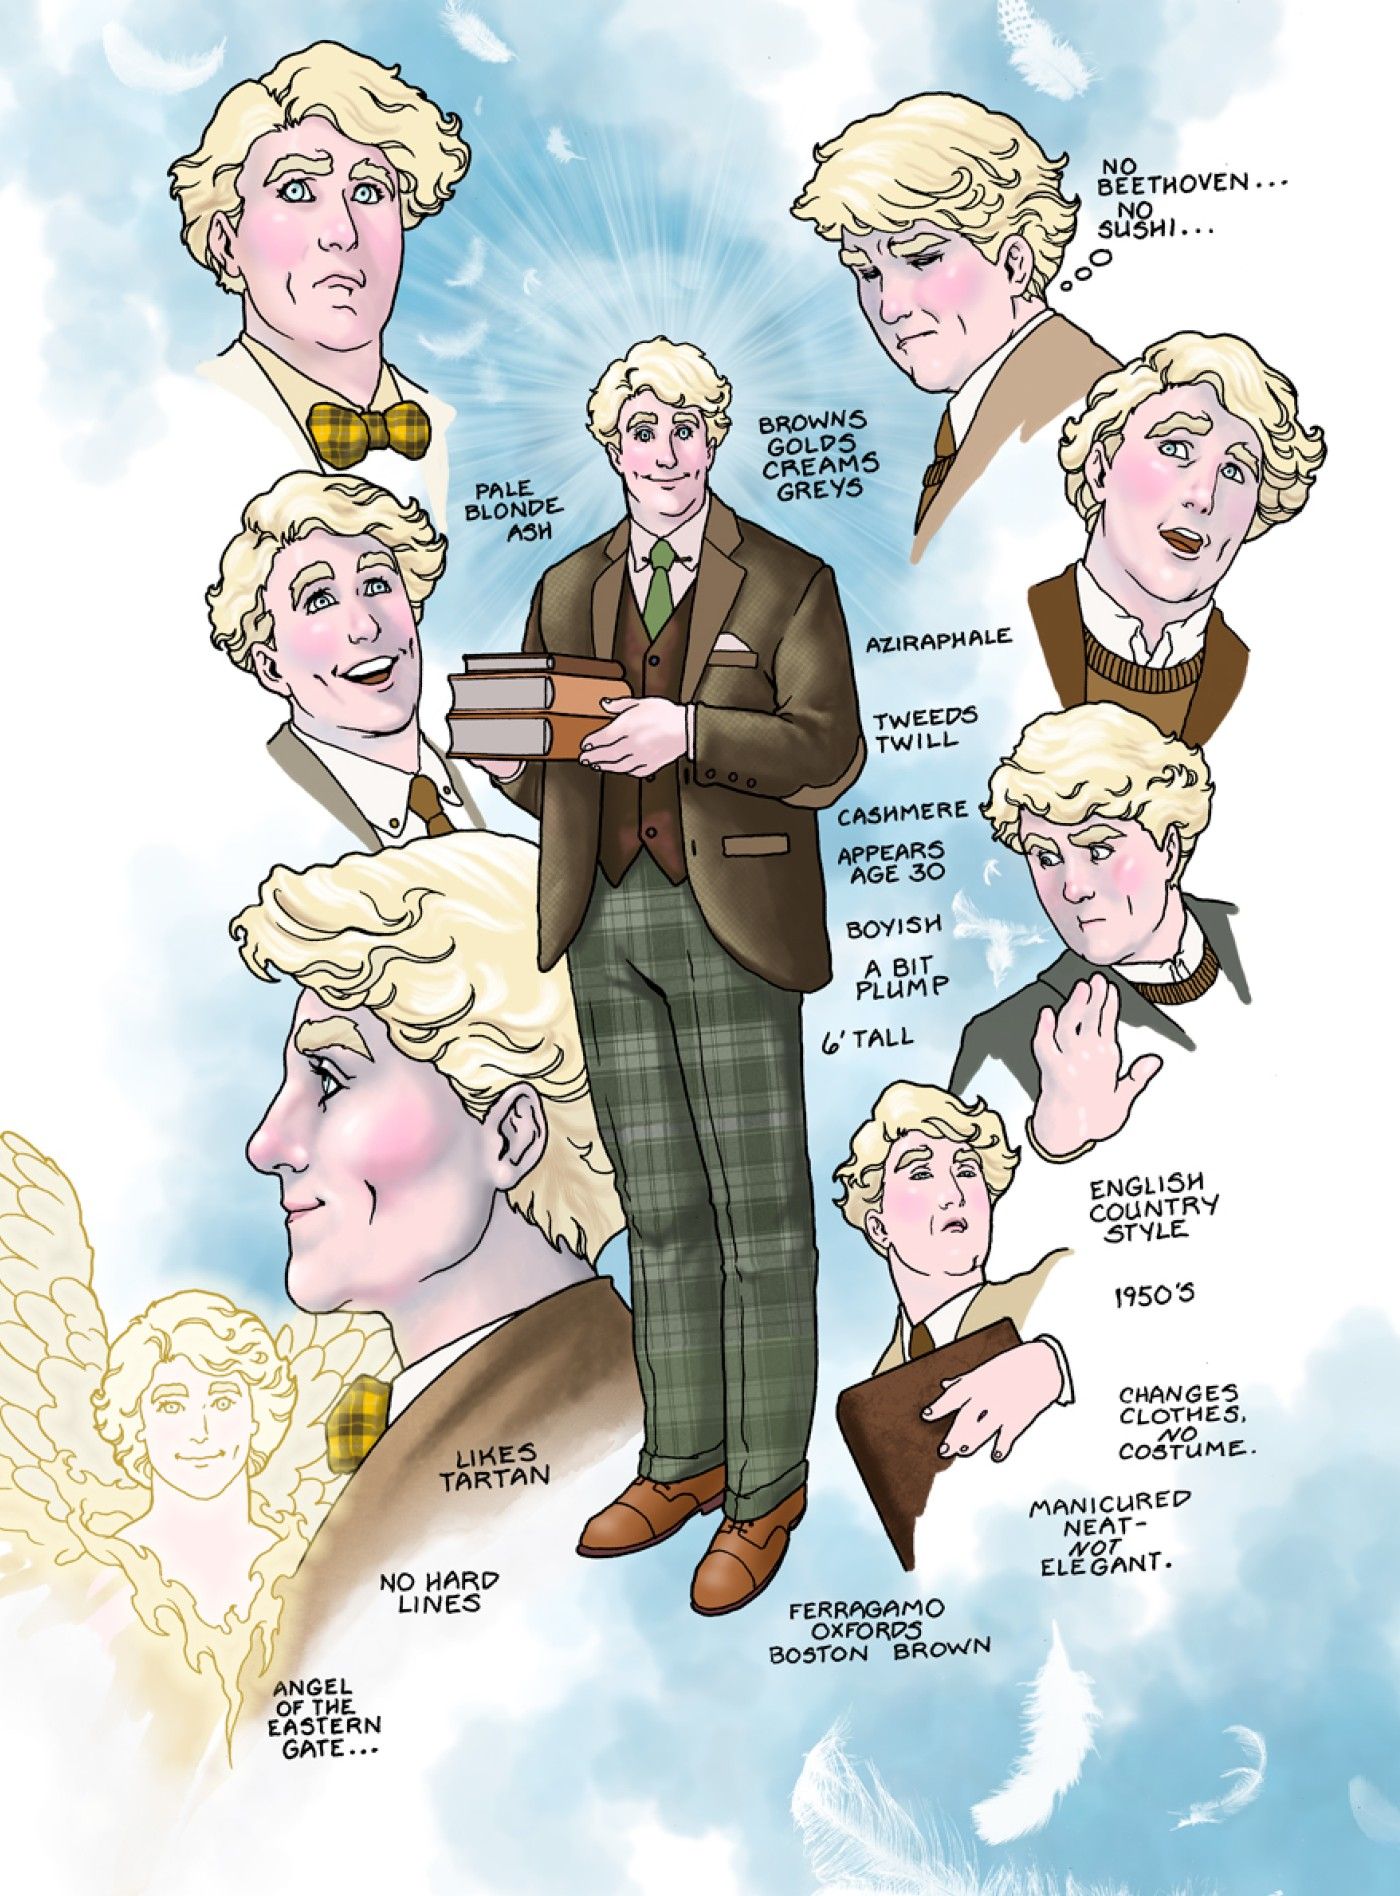 Crowley And Aziraphale Character Designs Revealed For New Record Breaking Good Omens Adaptation 3753